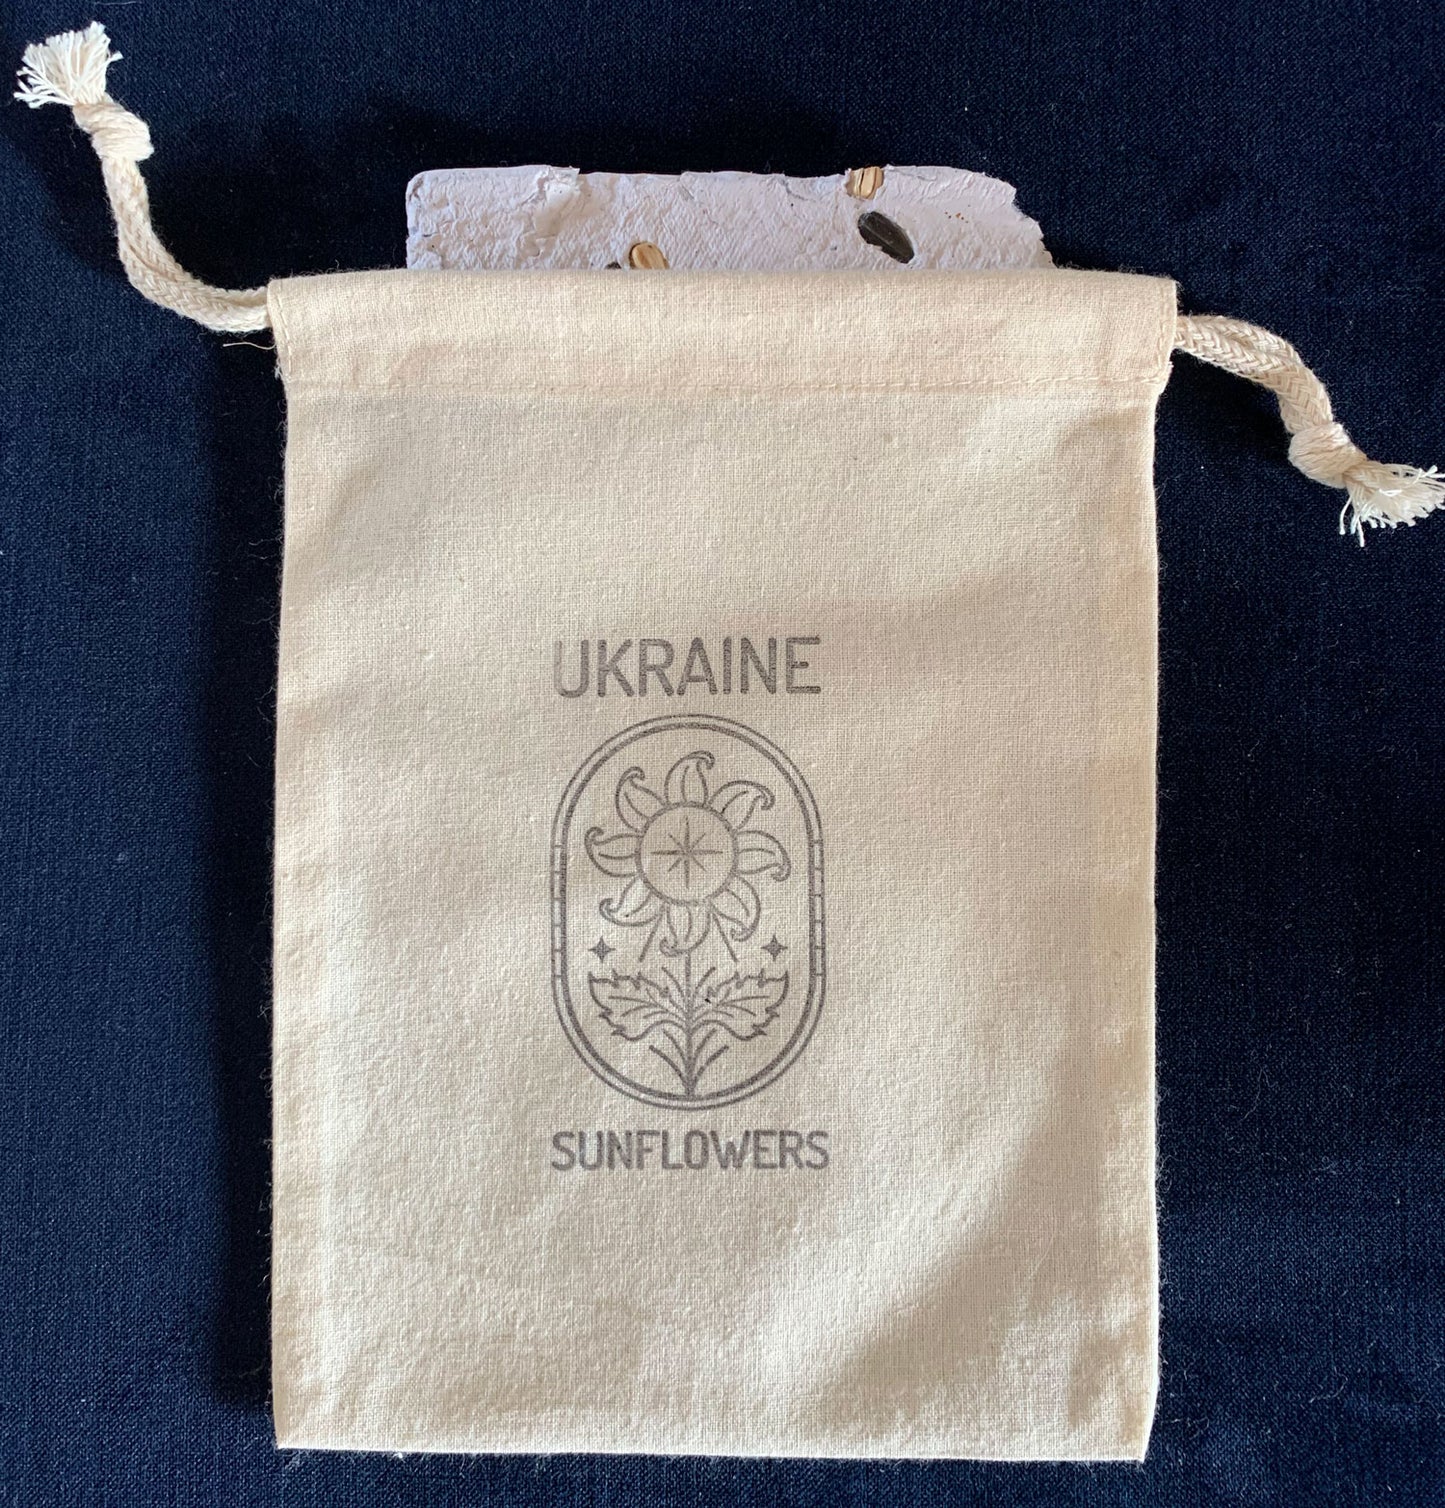 Sunflower seed paper and reusable produce bag for Ukraine